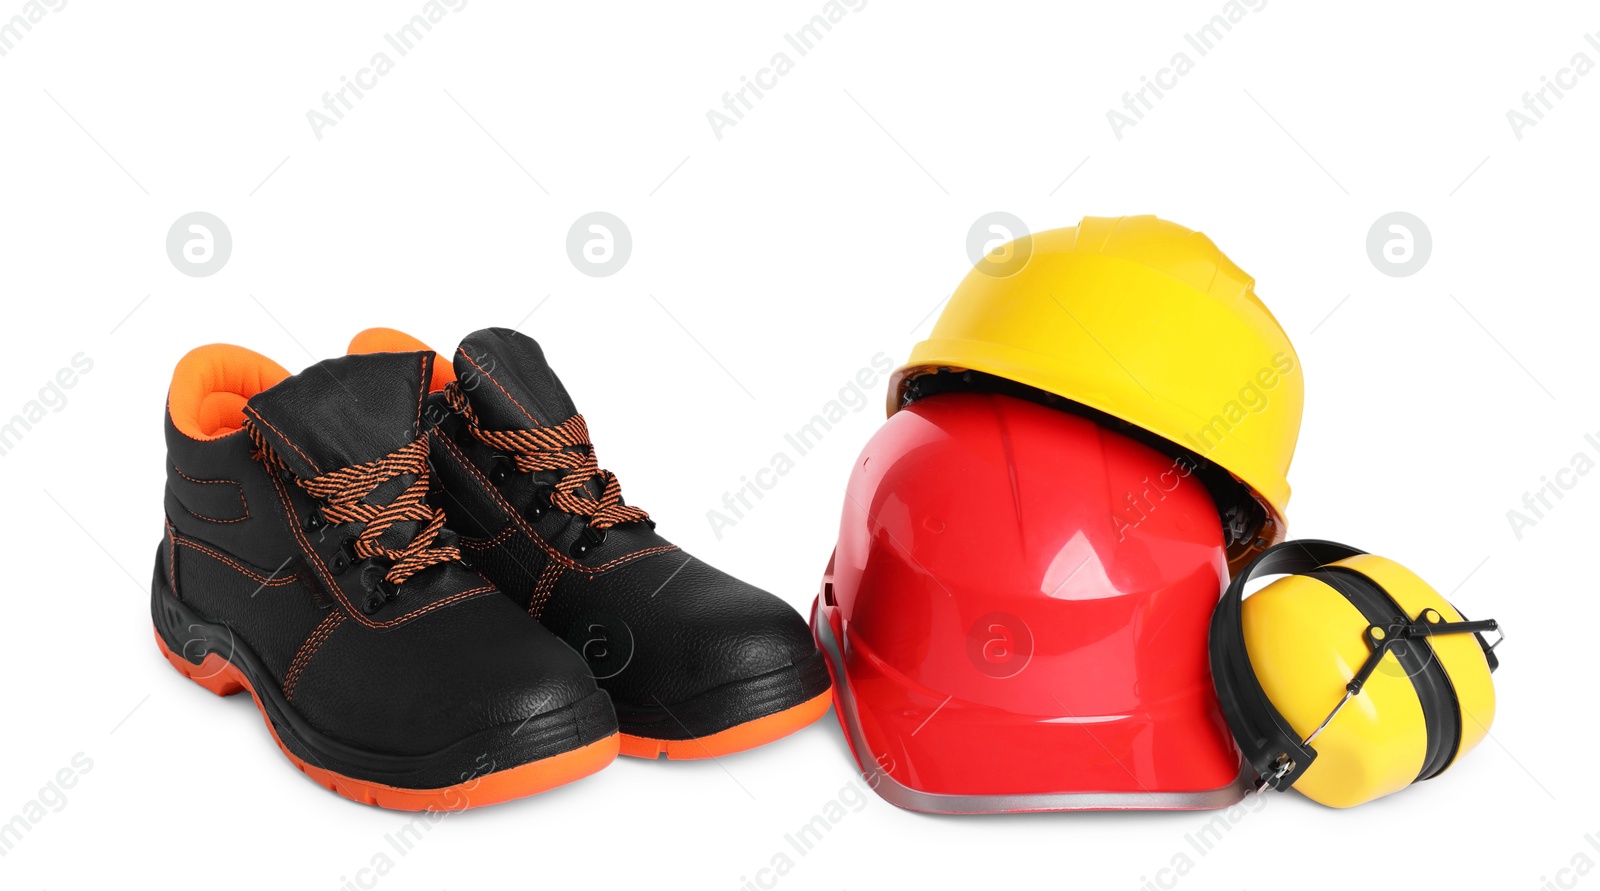 Photo of Pair of working boots, hard hats and earmuffs isolated on white